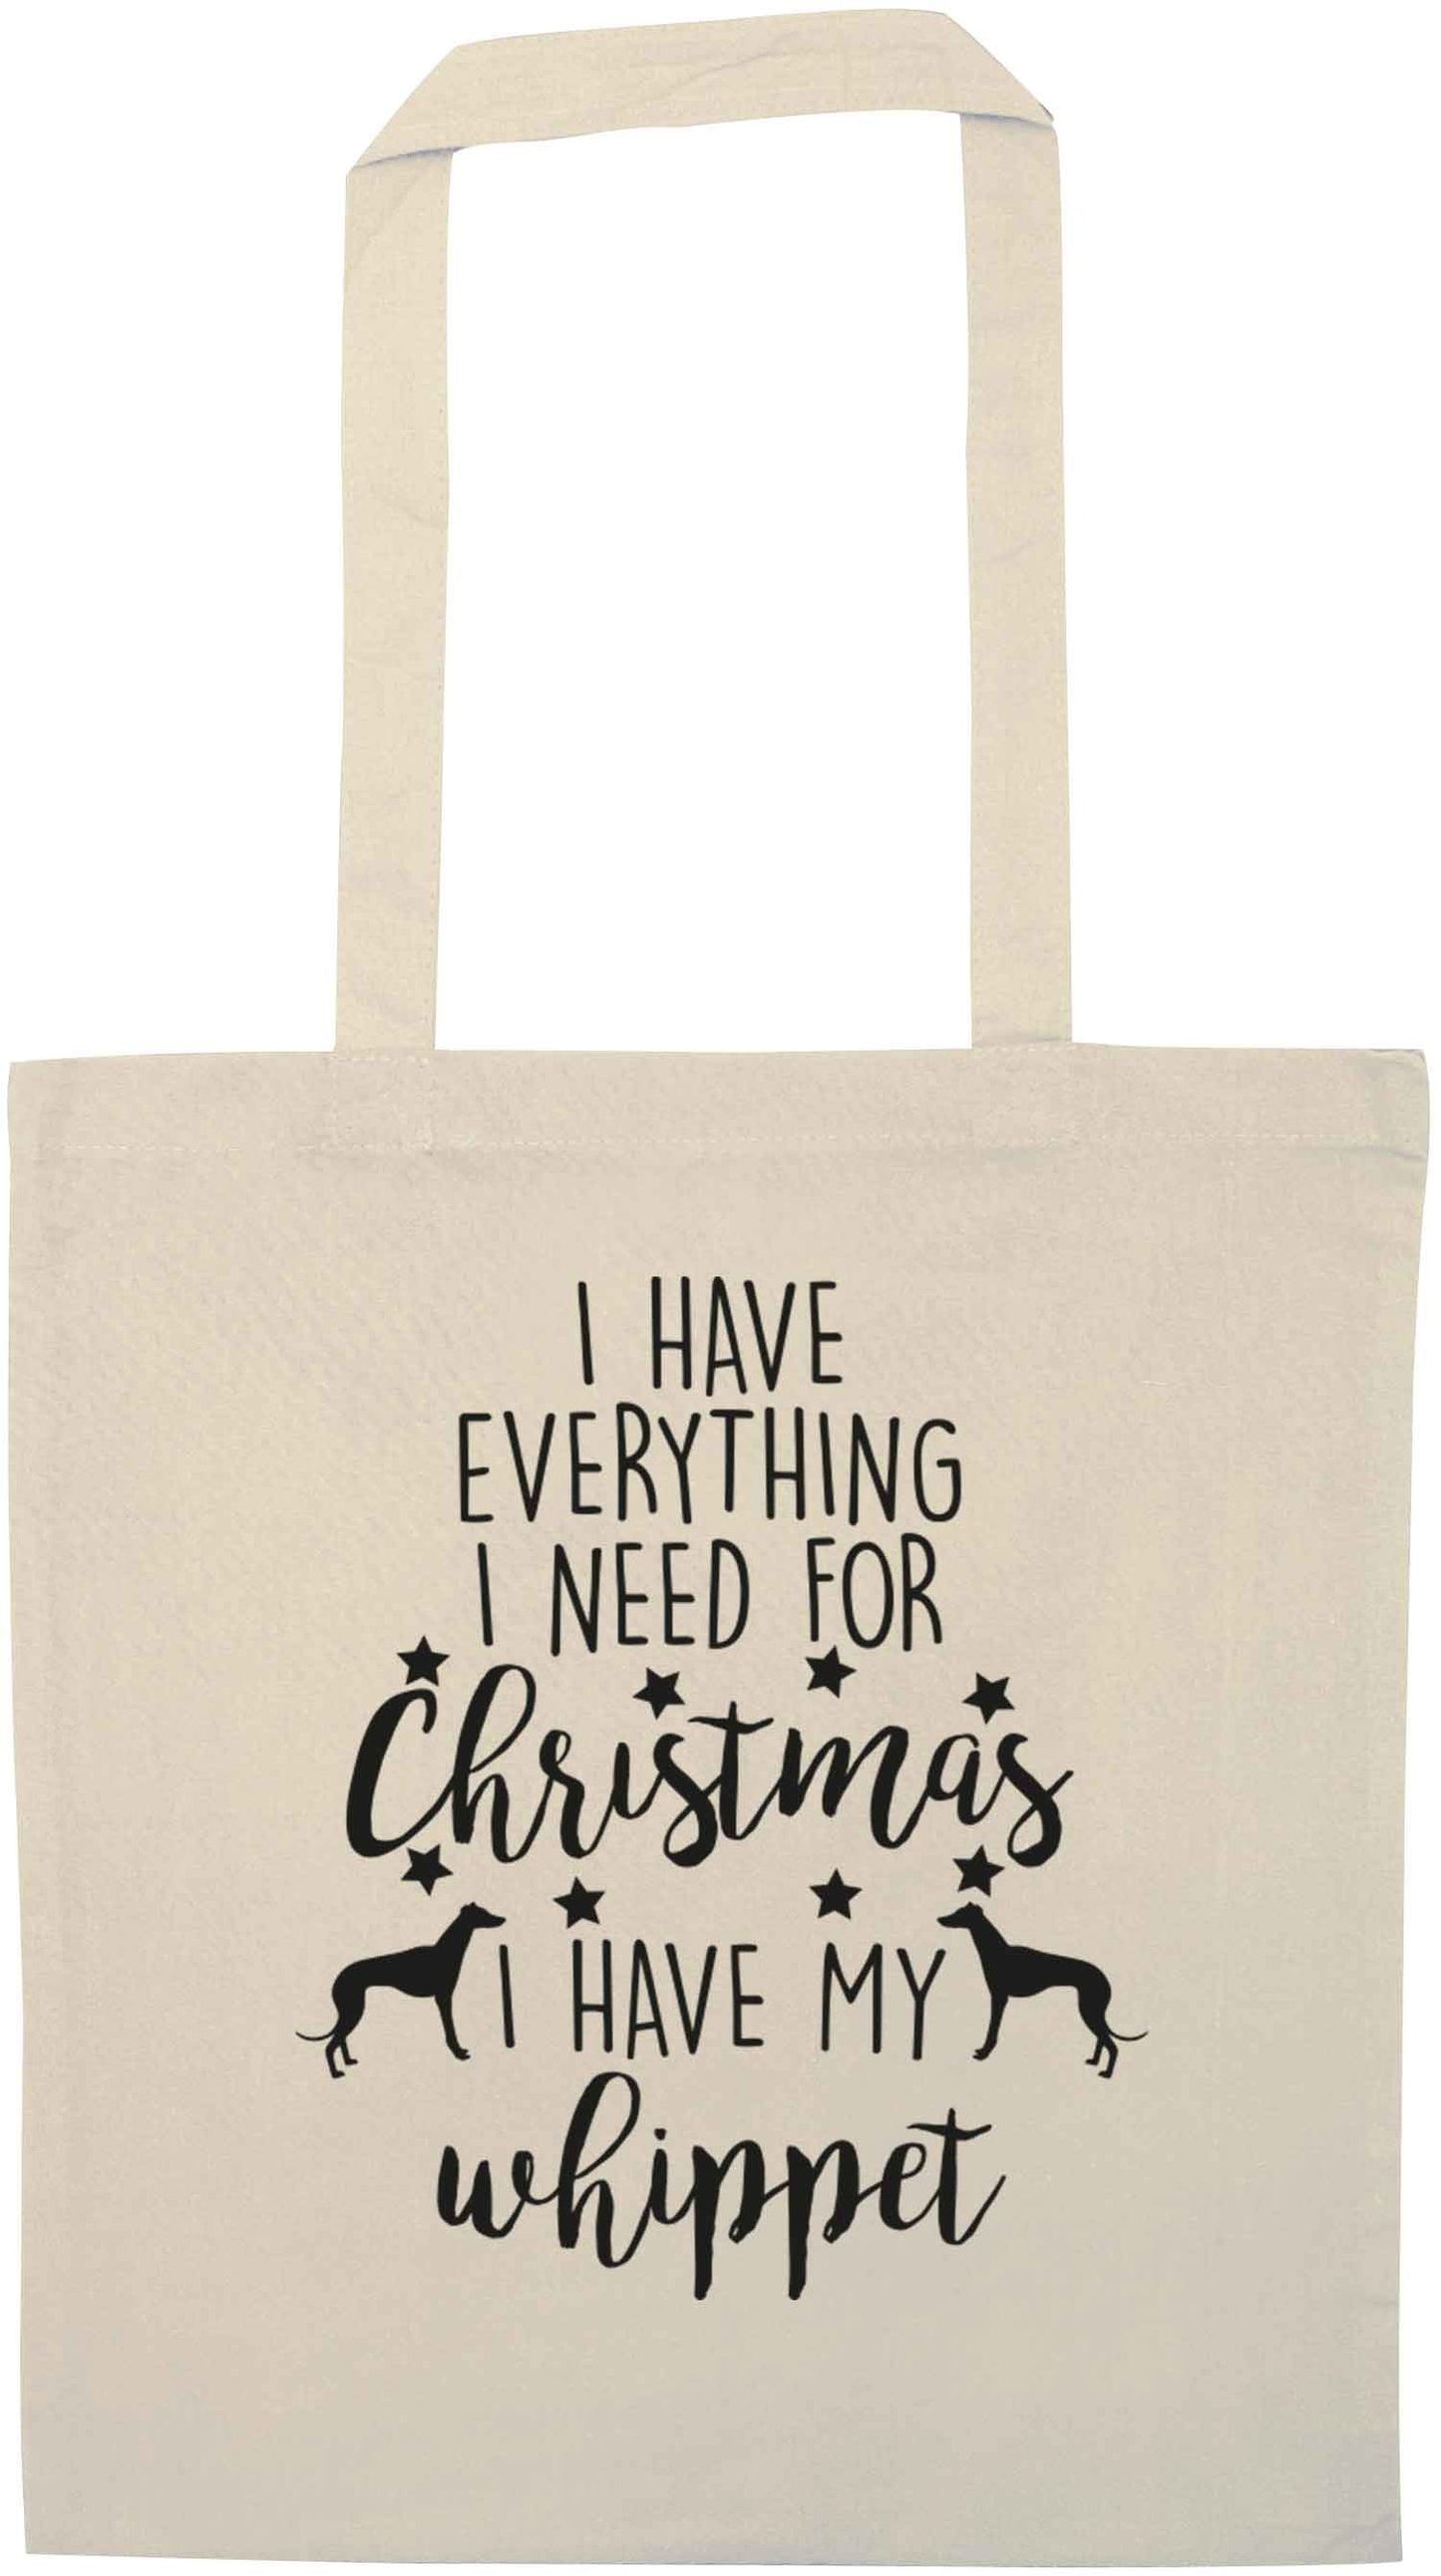 I have everything I need for Christmas I have my whippet natural tote bag